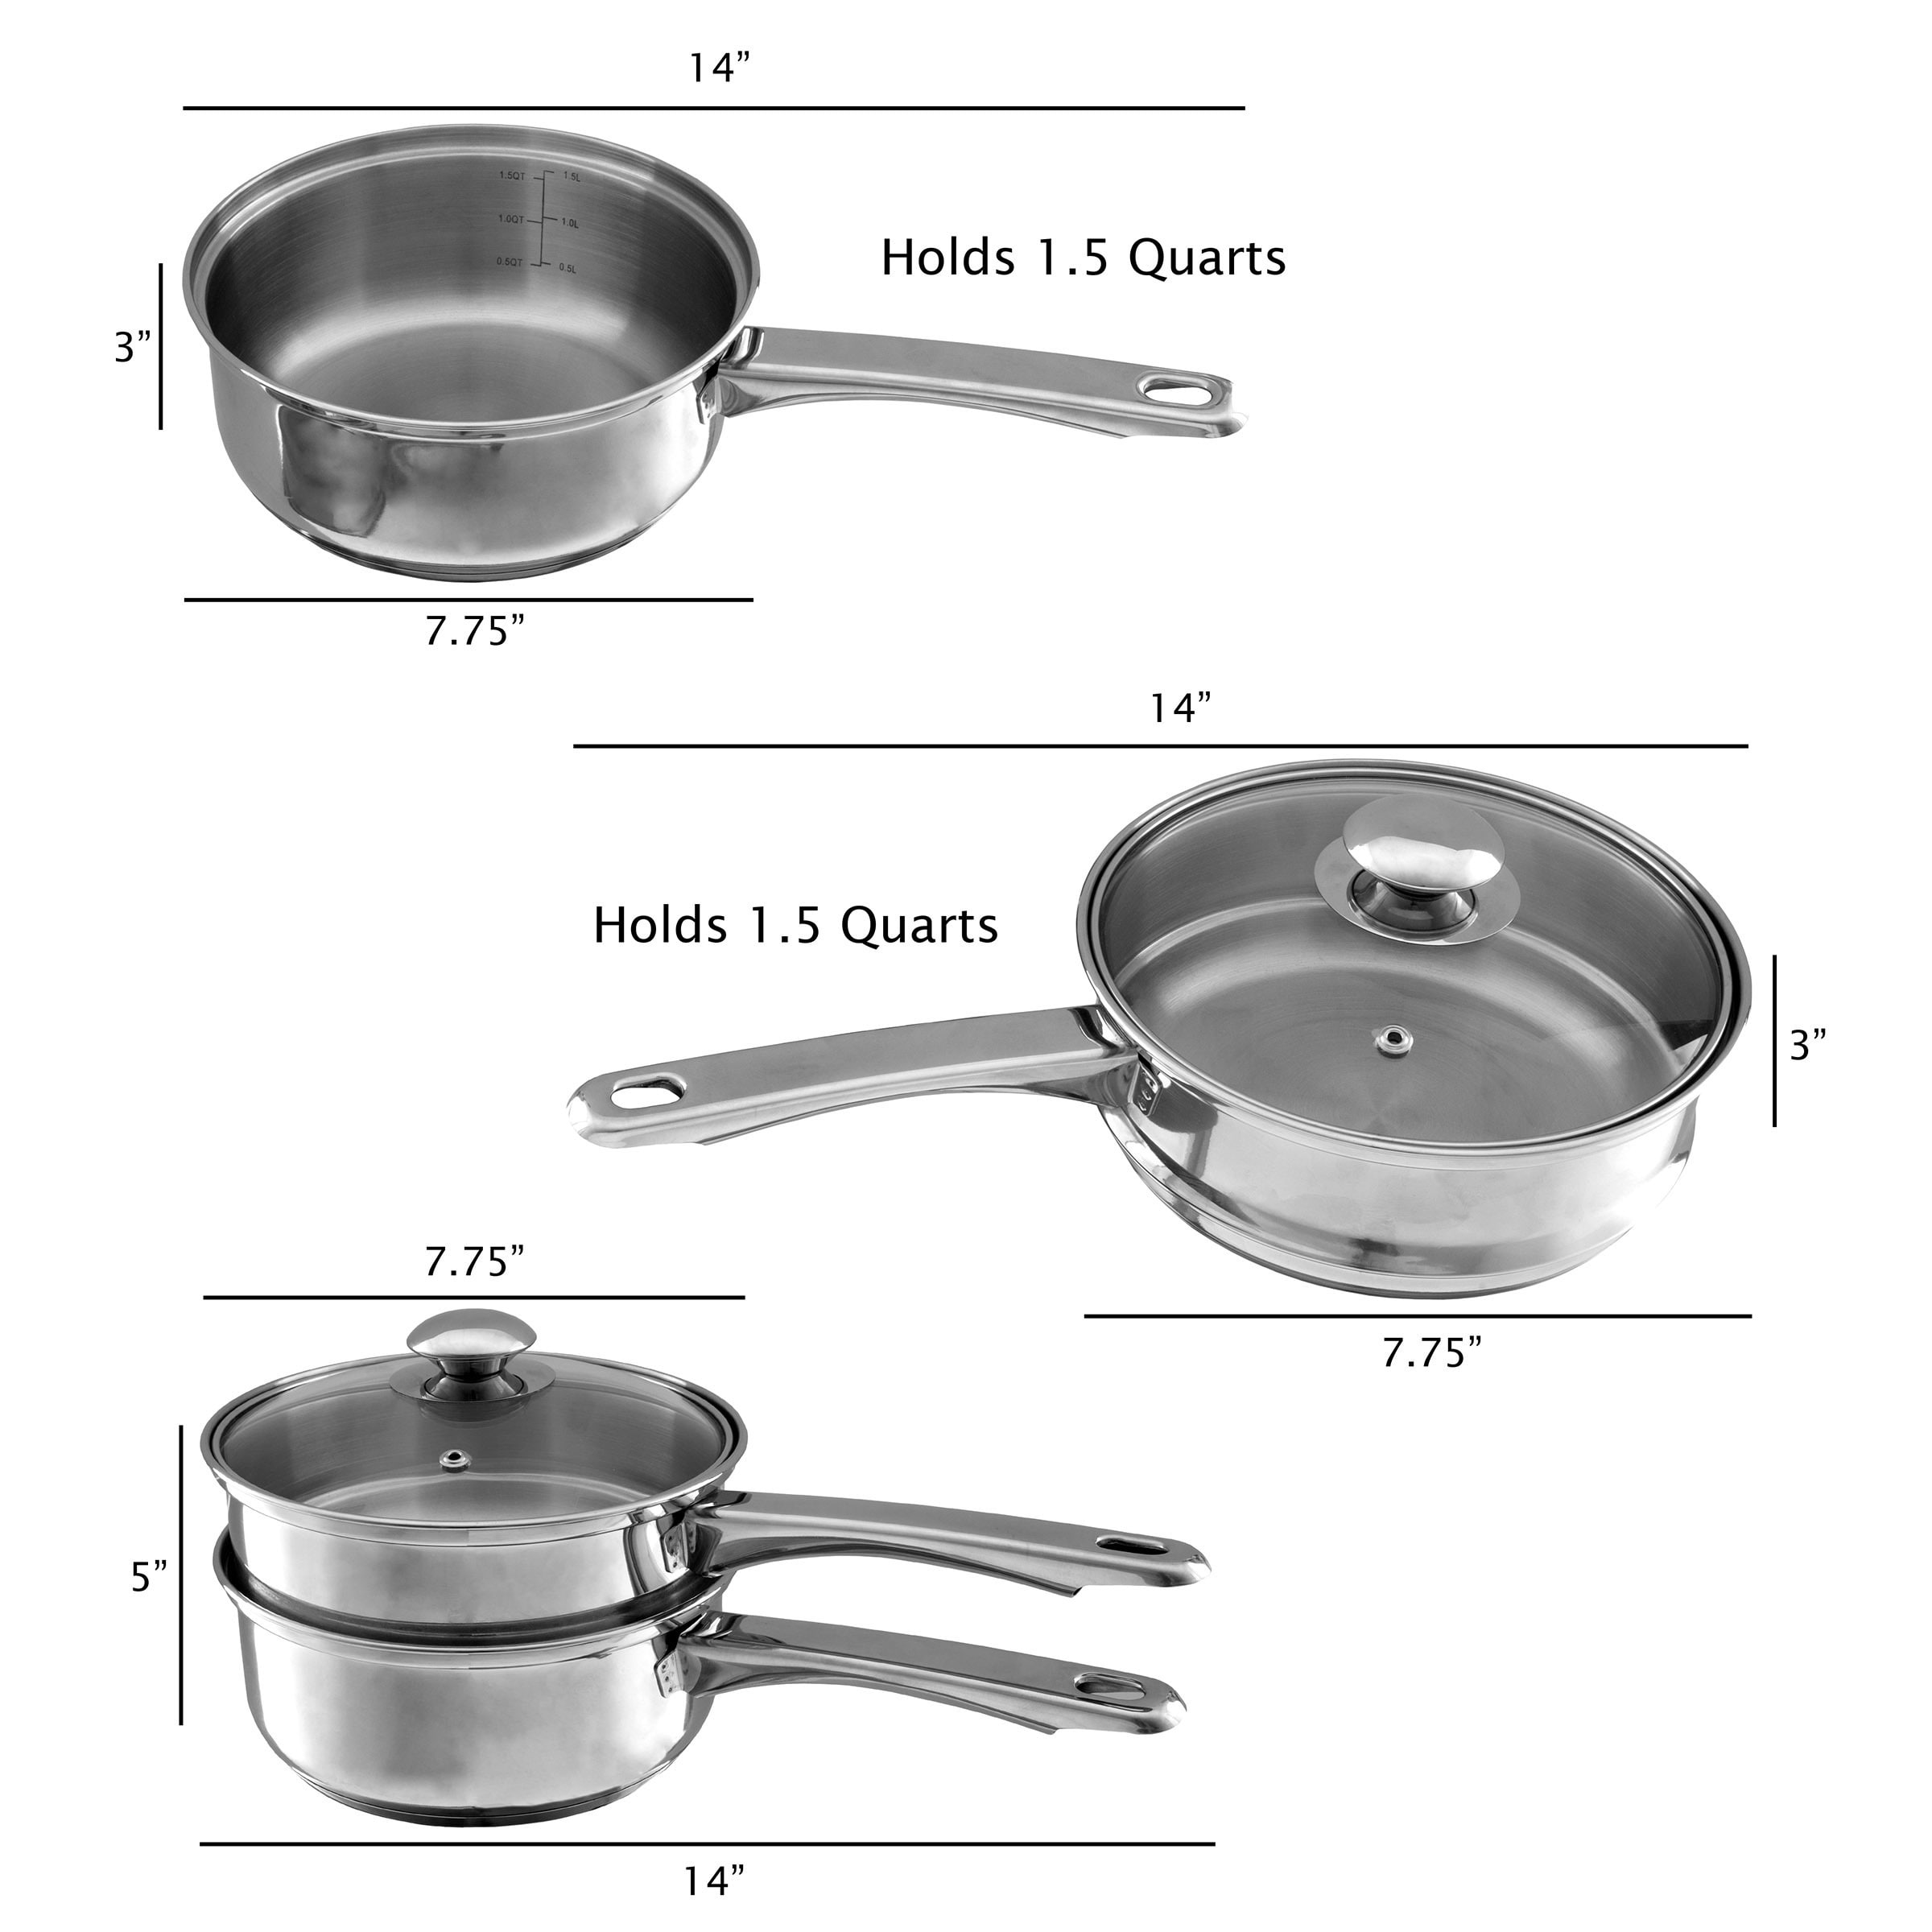 https://ak1.ostkcdn.com/images/products/19850297/Classic-Cuisine-Stainless-Steel-6-Cup-Double-Boiler-and-1.5-Quart-Saucepan-2-in-1-Combo-be56dc56-fca6-4d00-a2f6-075413ce3f41.jpg